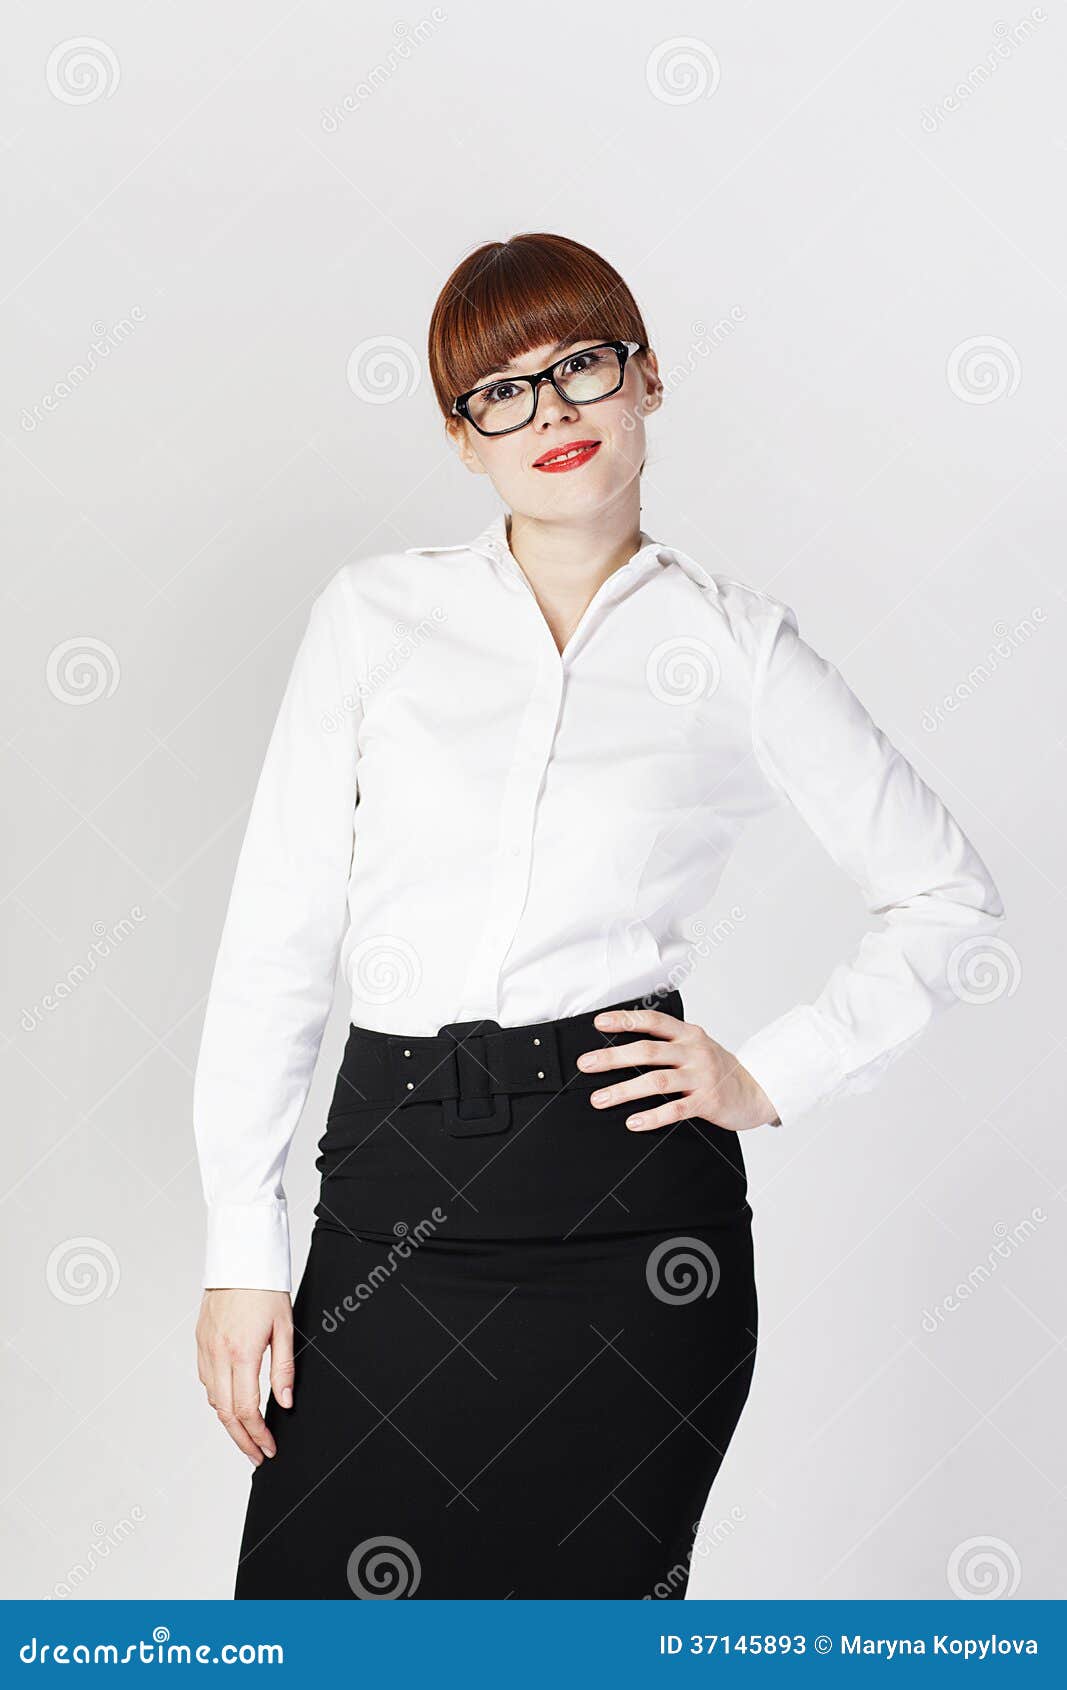 portrait of buisness woman on white background.